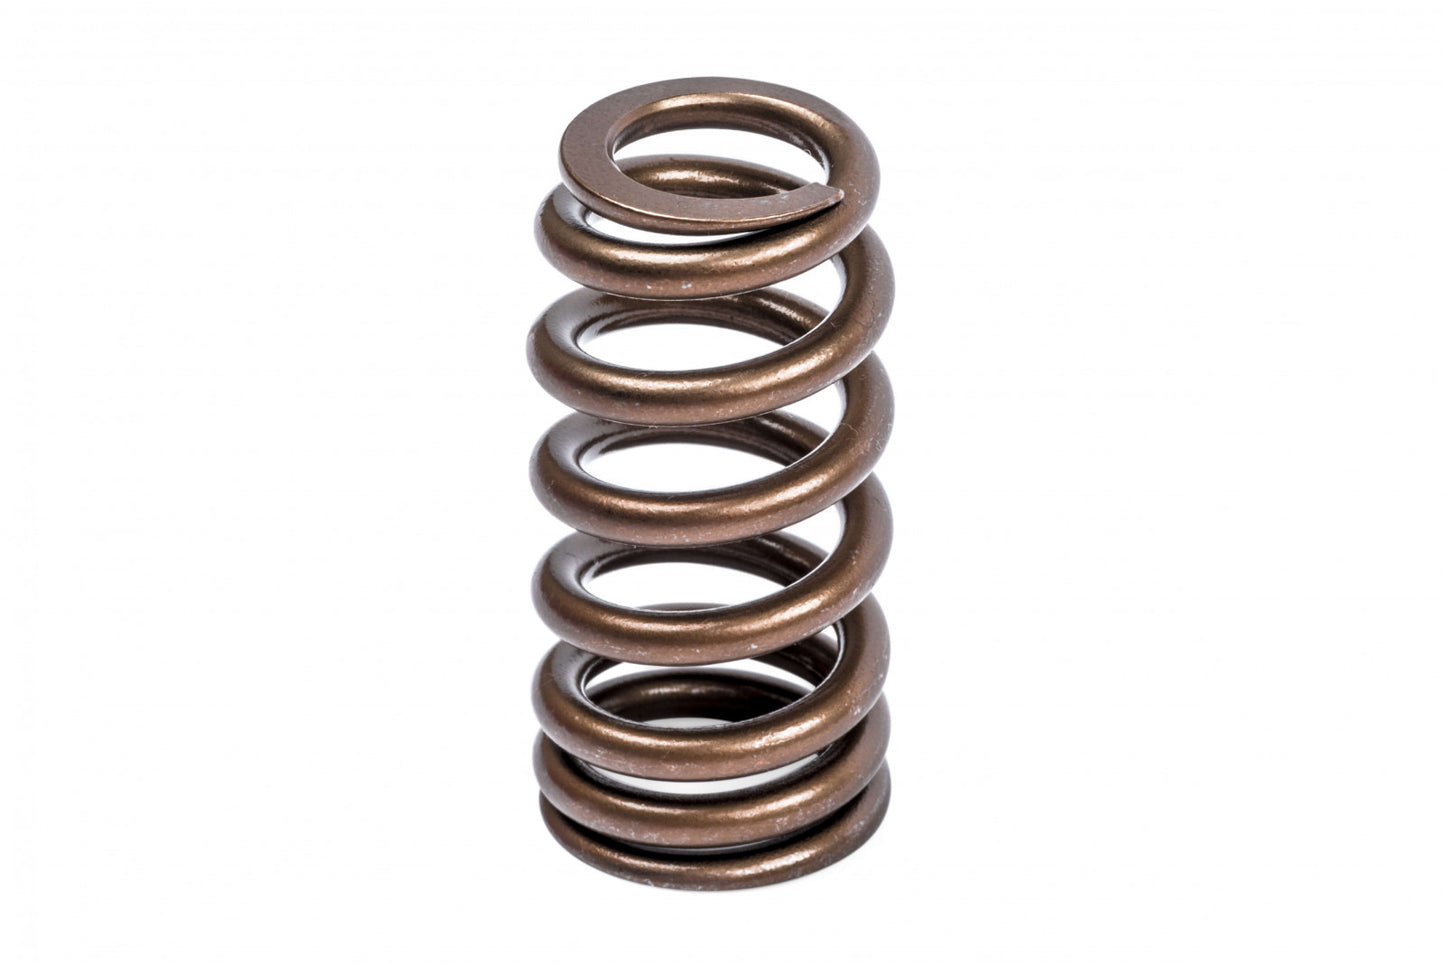 APR Valve Springs/Seats/Retainers - Set of 24 MS100090